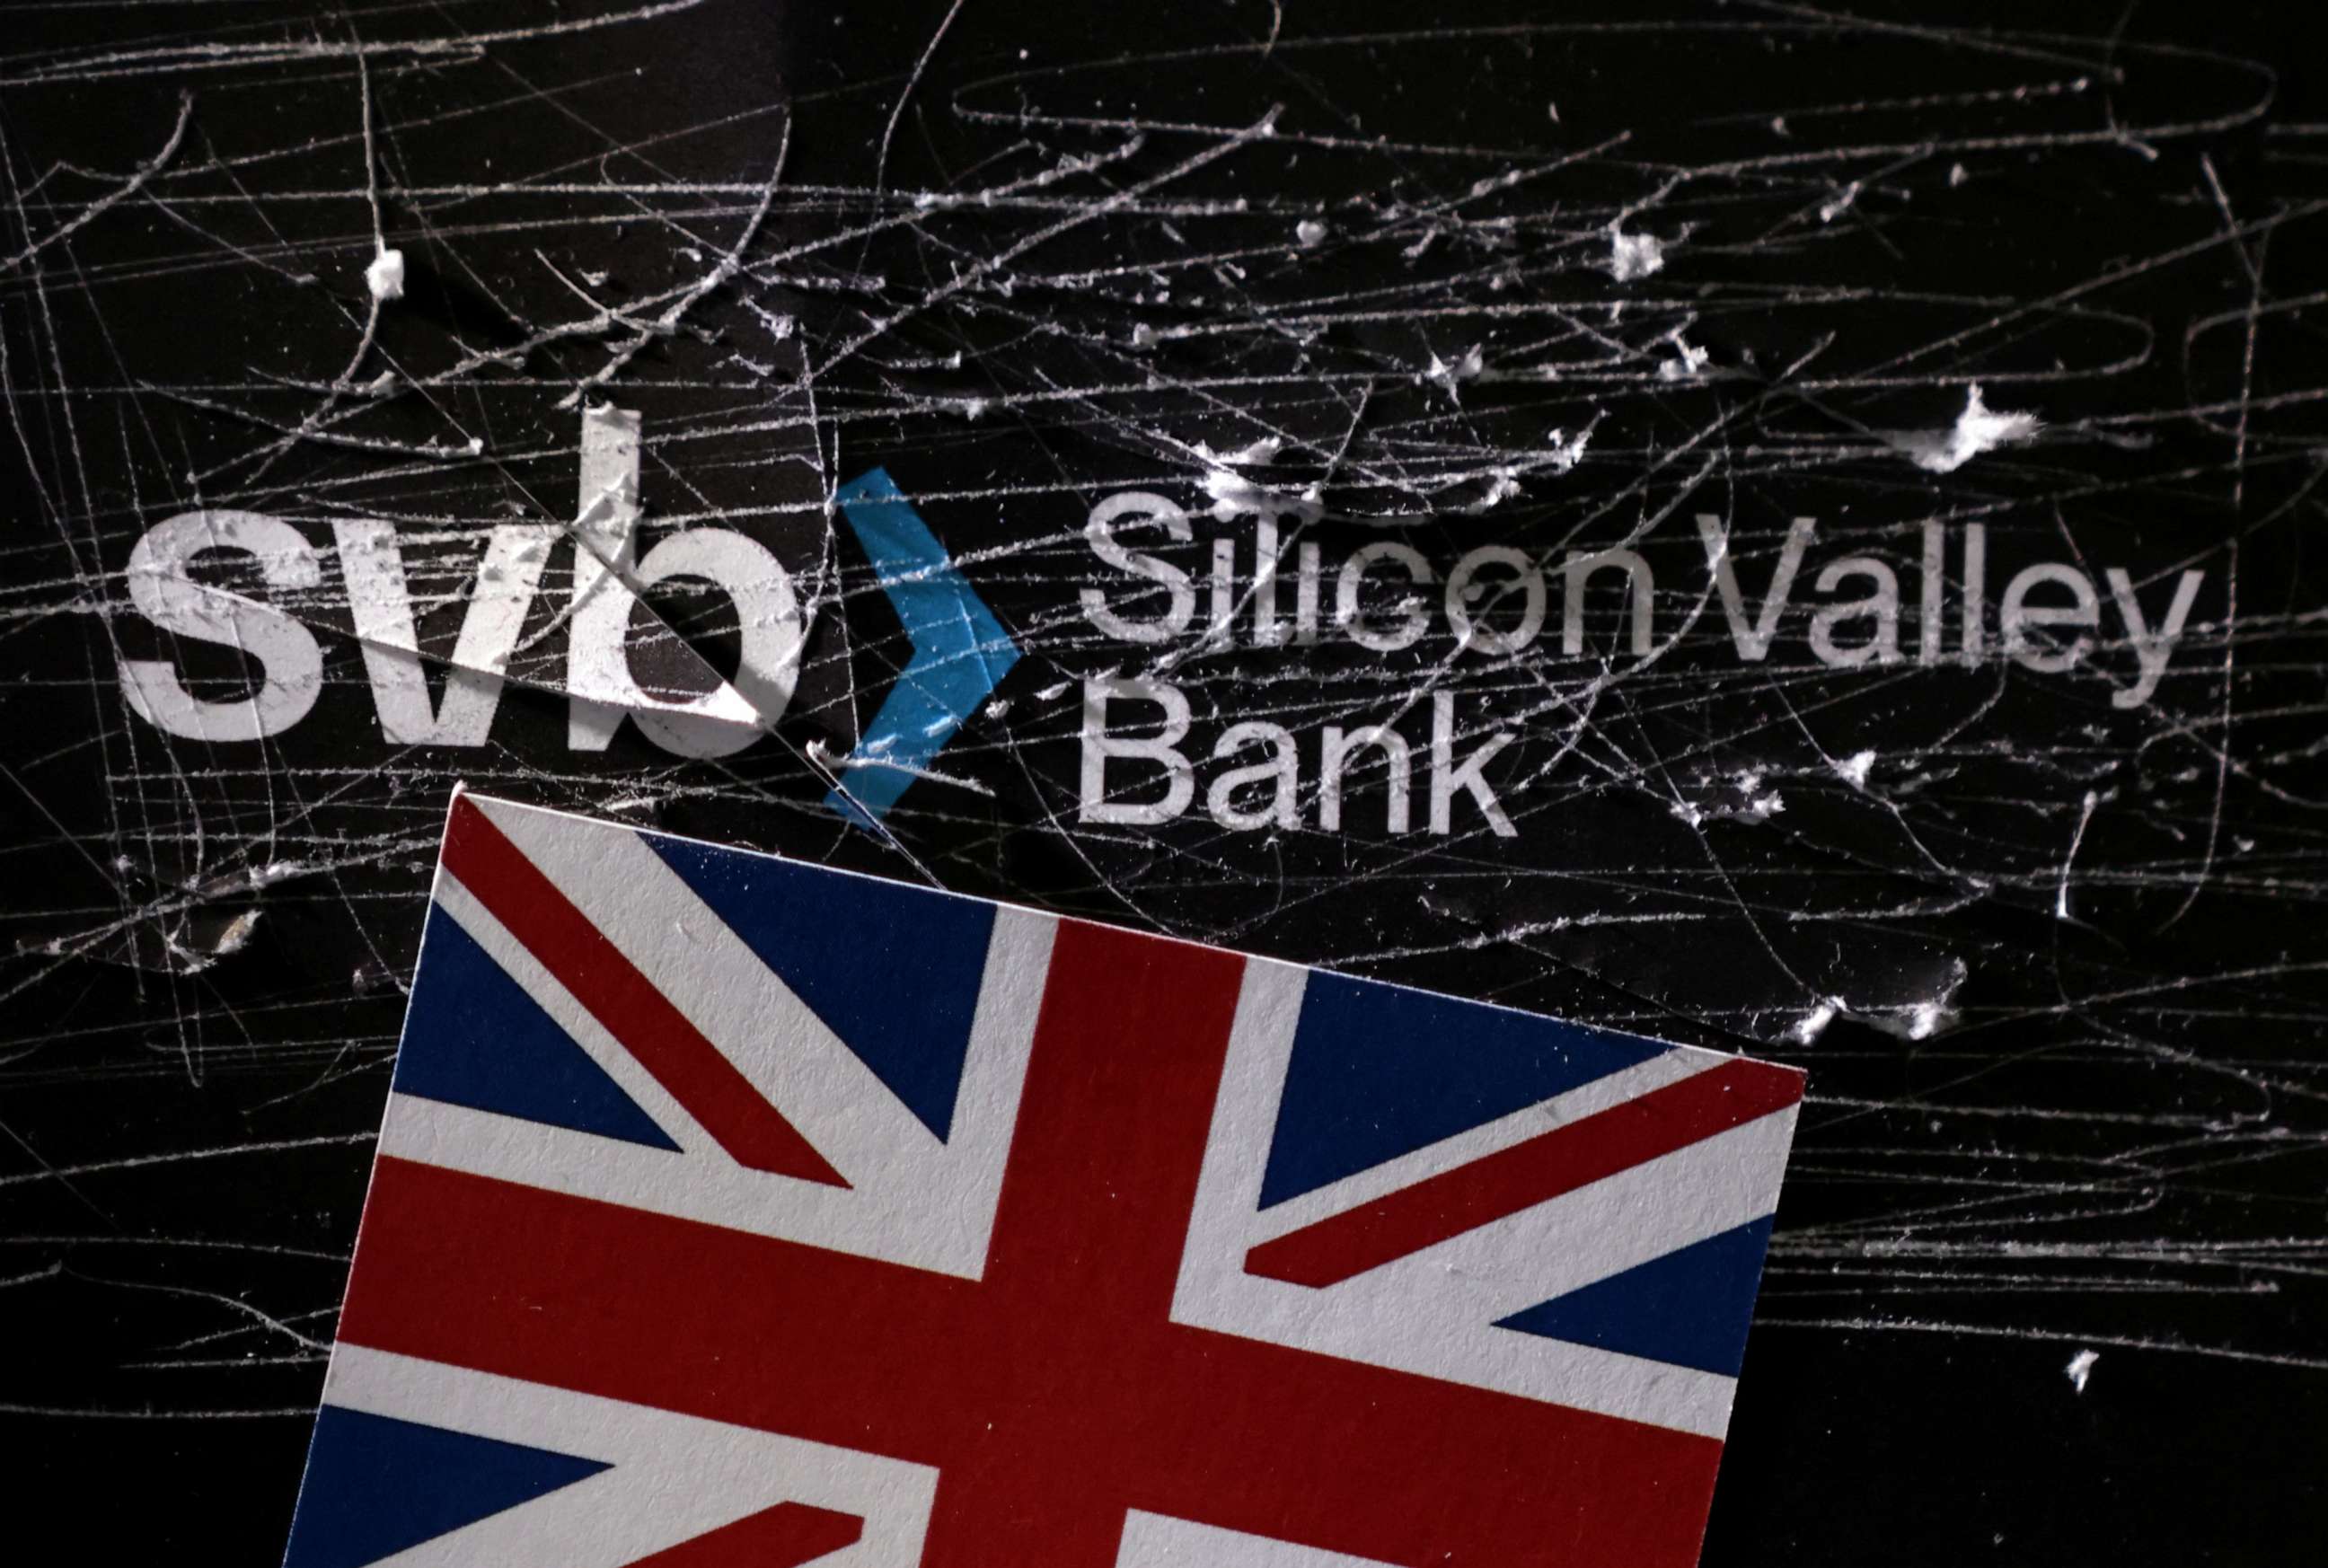 PHOTO: Destroyed Silicon Valley Bank logo and UK flag is seen in this illustration taken March 13, 2023.